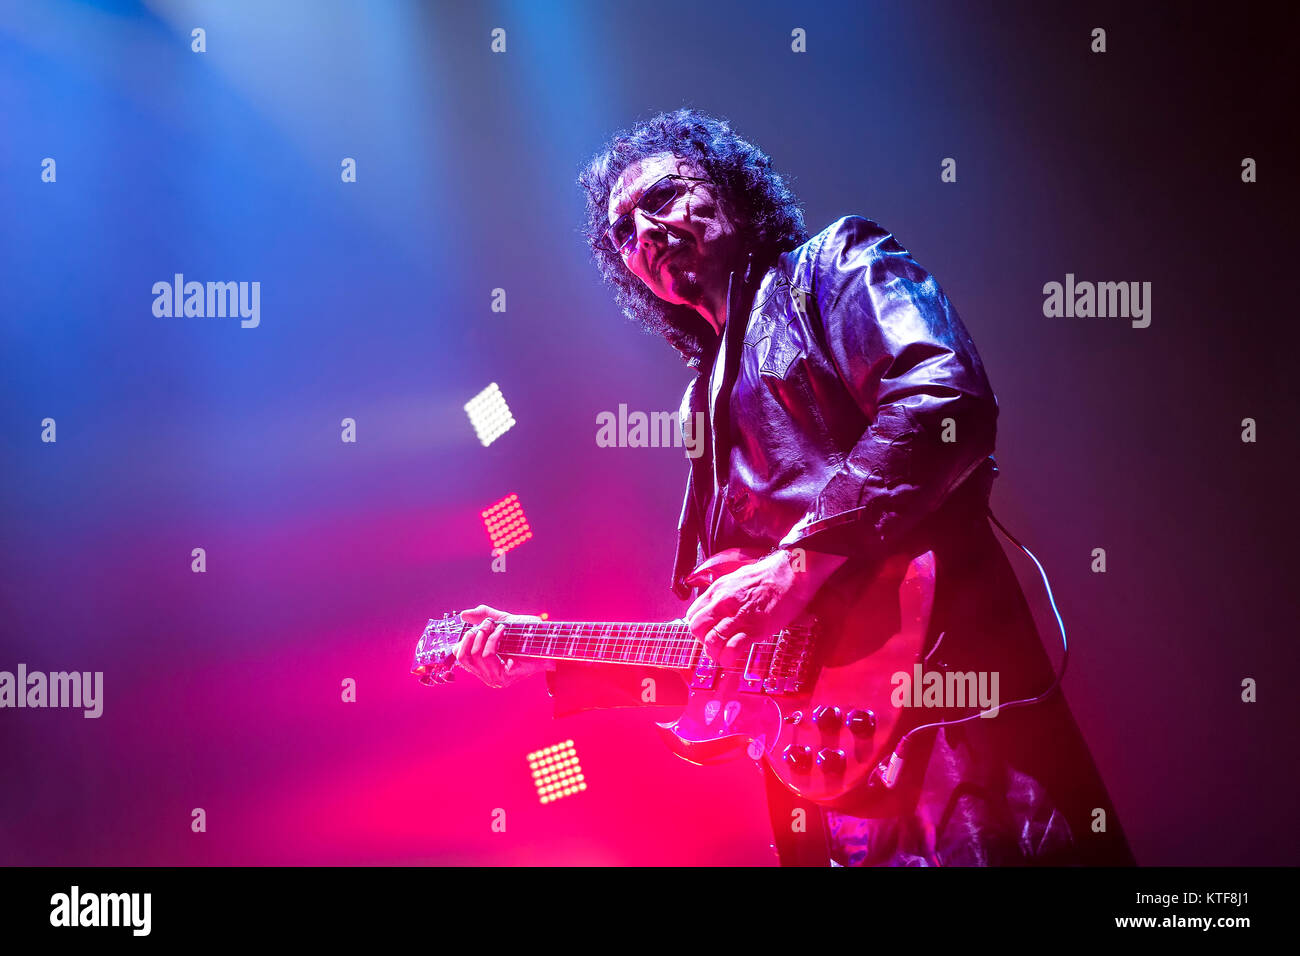 The English rock band Black Sabbath performs a live concert at Telenor Arena in Oslo. Here musician Tony Iommi on guitar is seen live on stage. Norway, 24/11 2013. Stock Photo